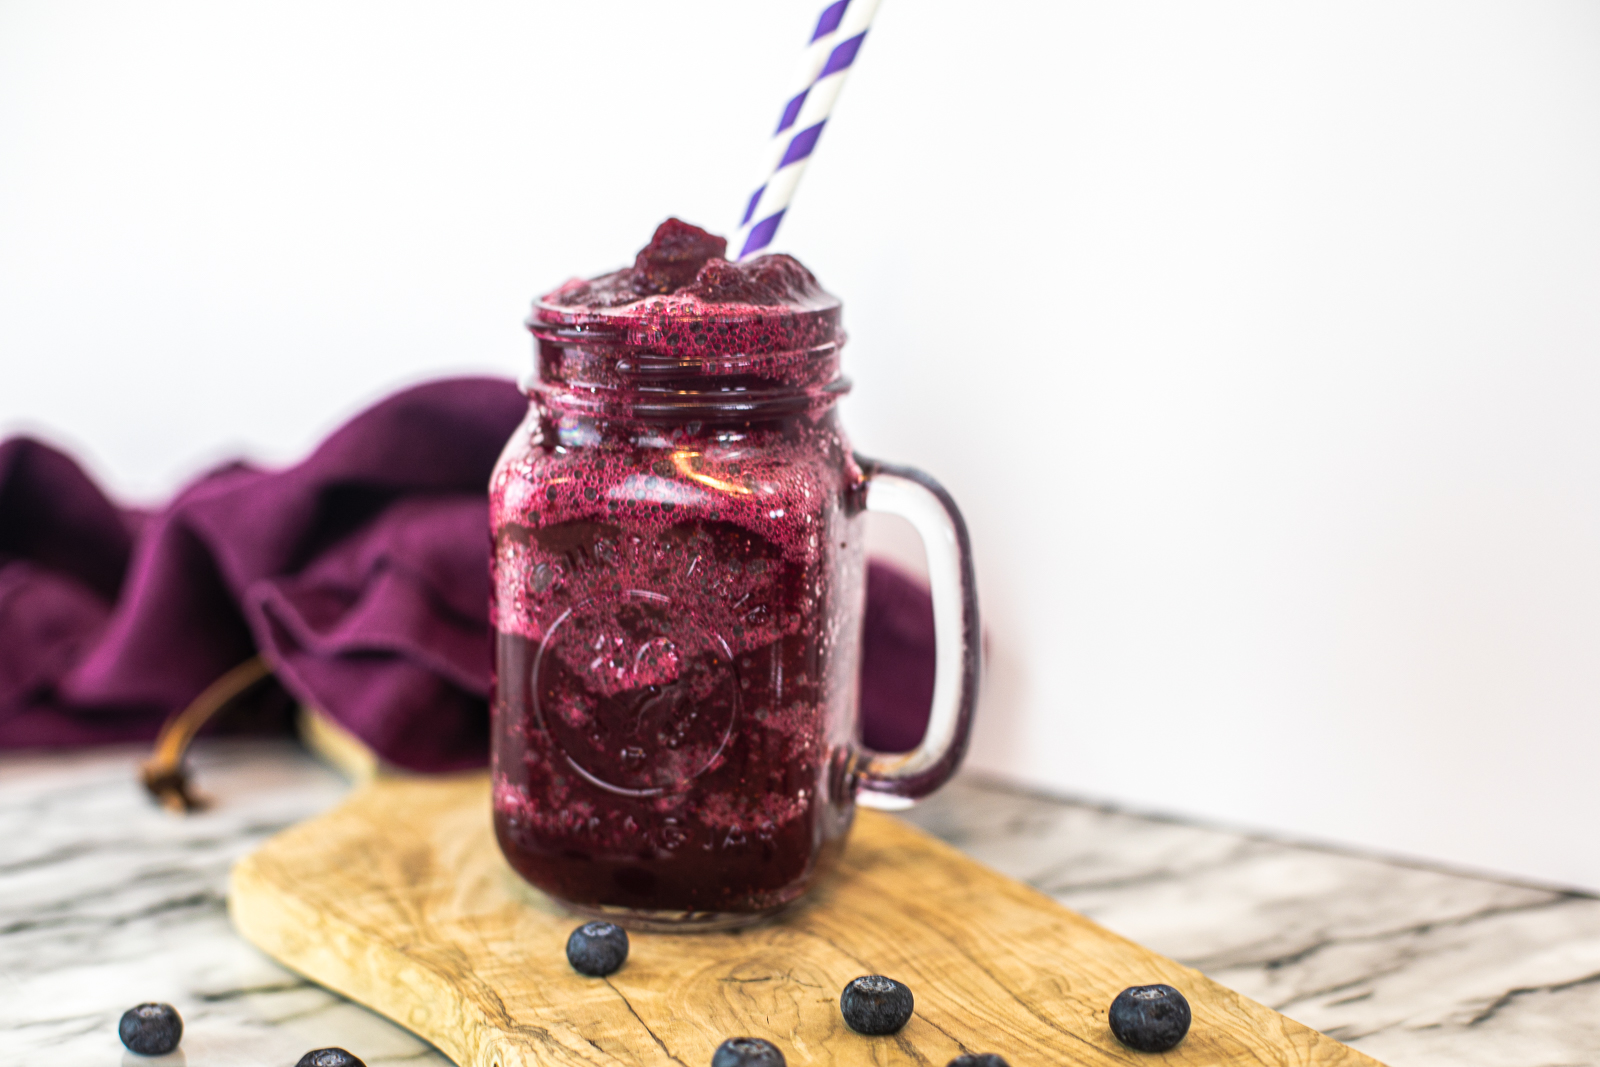 Blended Blueberry Daiquiri on a wooden slab with a purple tea towel in the background. 